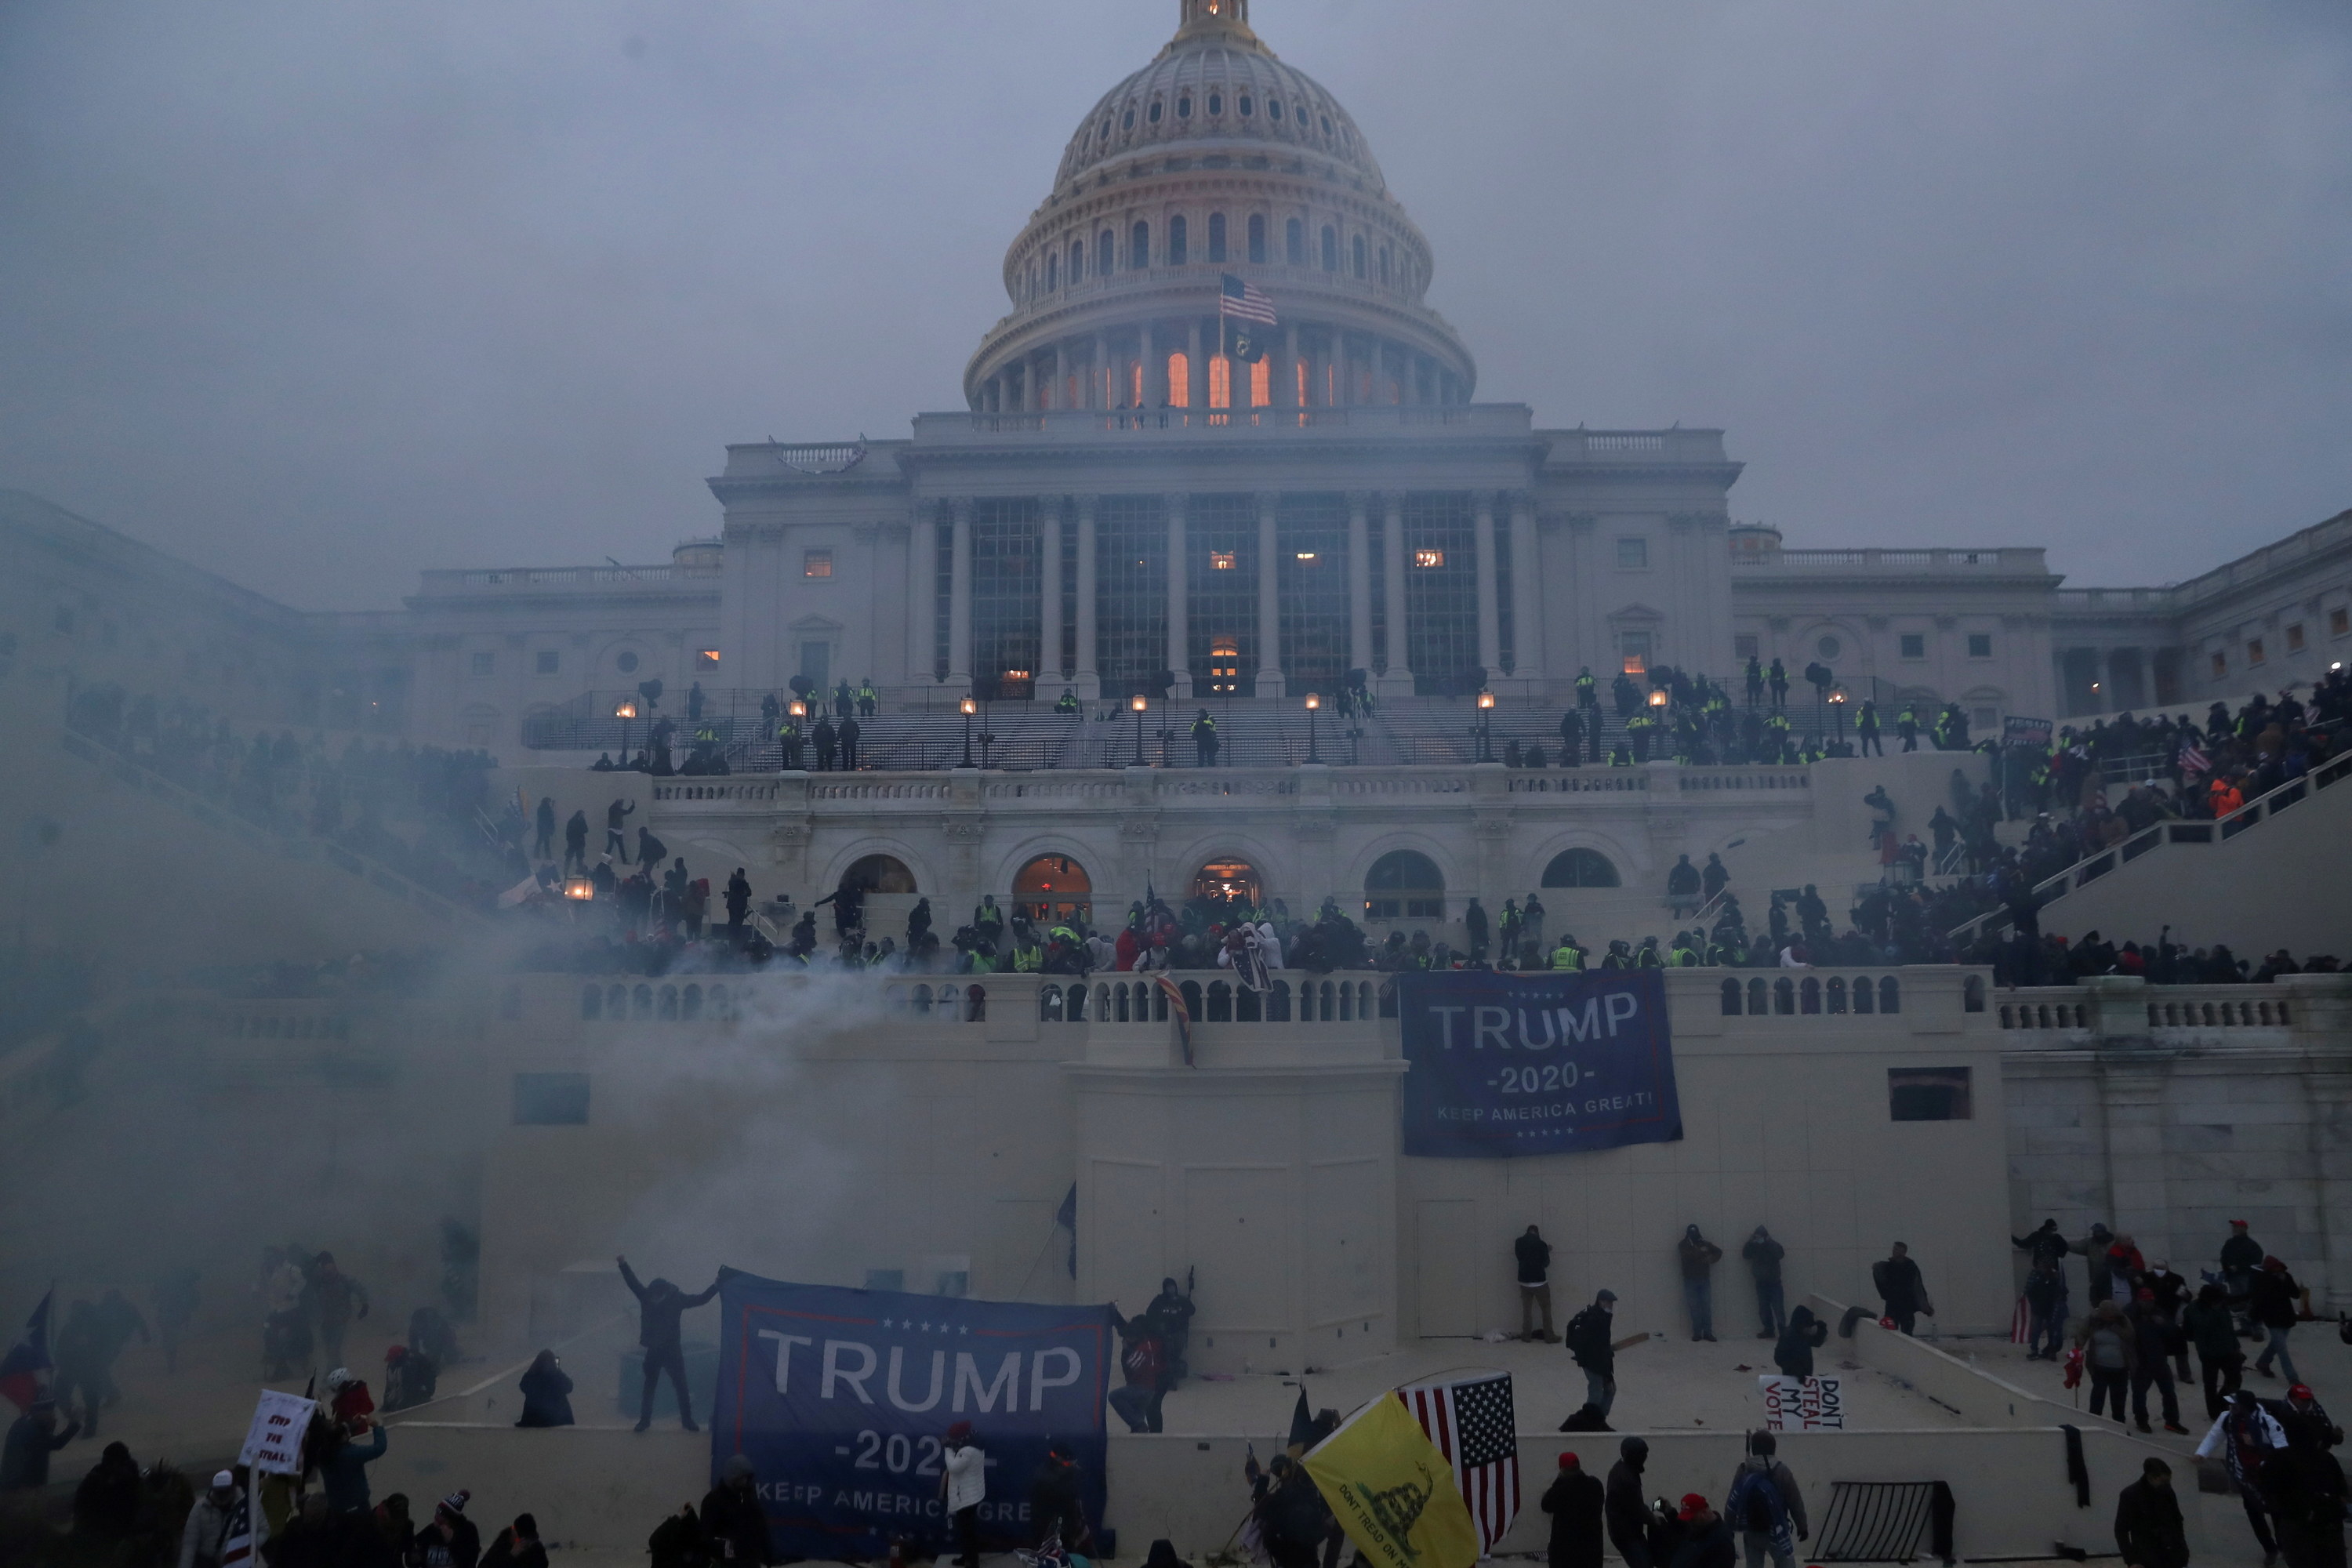 The capitol building, with lights on inside, is seen through smoke as hundreds of police and protesters carrying trump signs are on the steps in a chaotic scene 